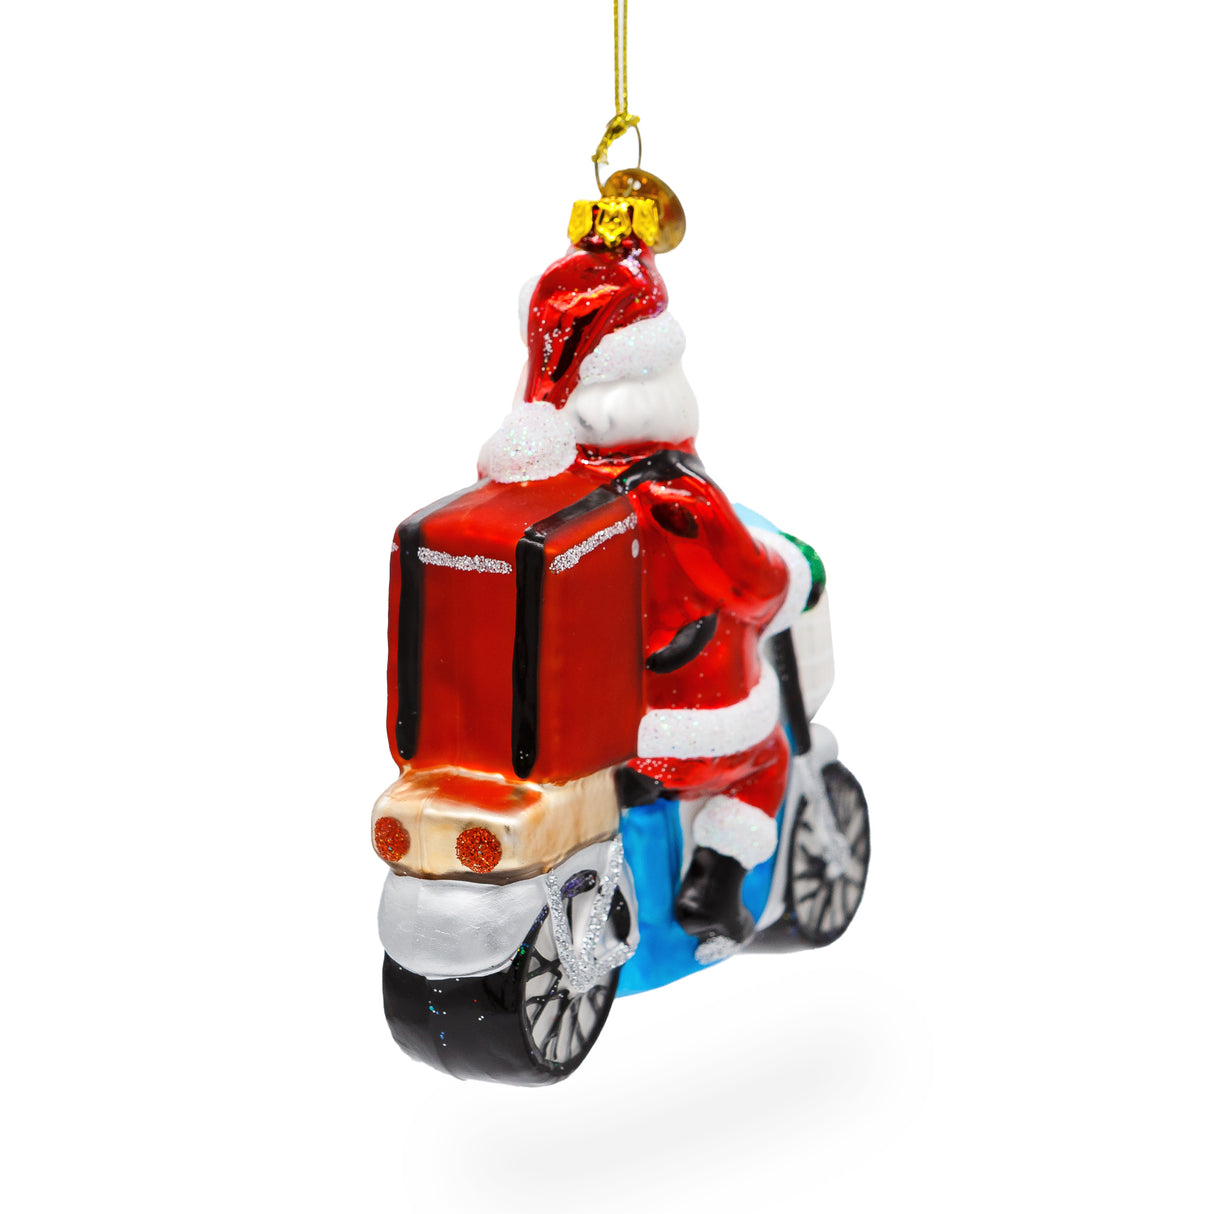 Cheerful Santa Food Delivery - Blown Glass Christmas Ornament ,dimensions in inches: 4.5 x 1.7 x 4.0